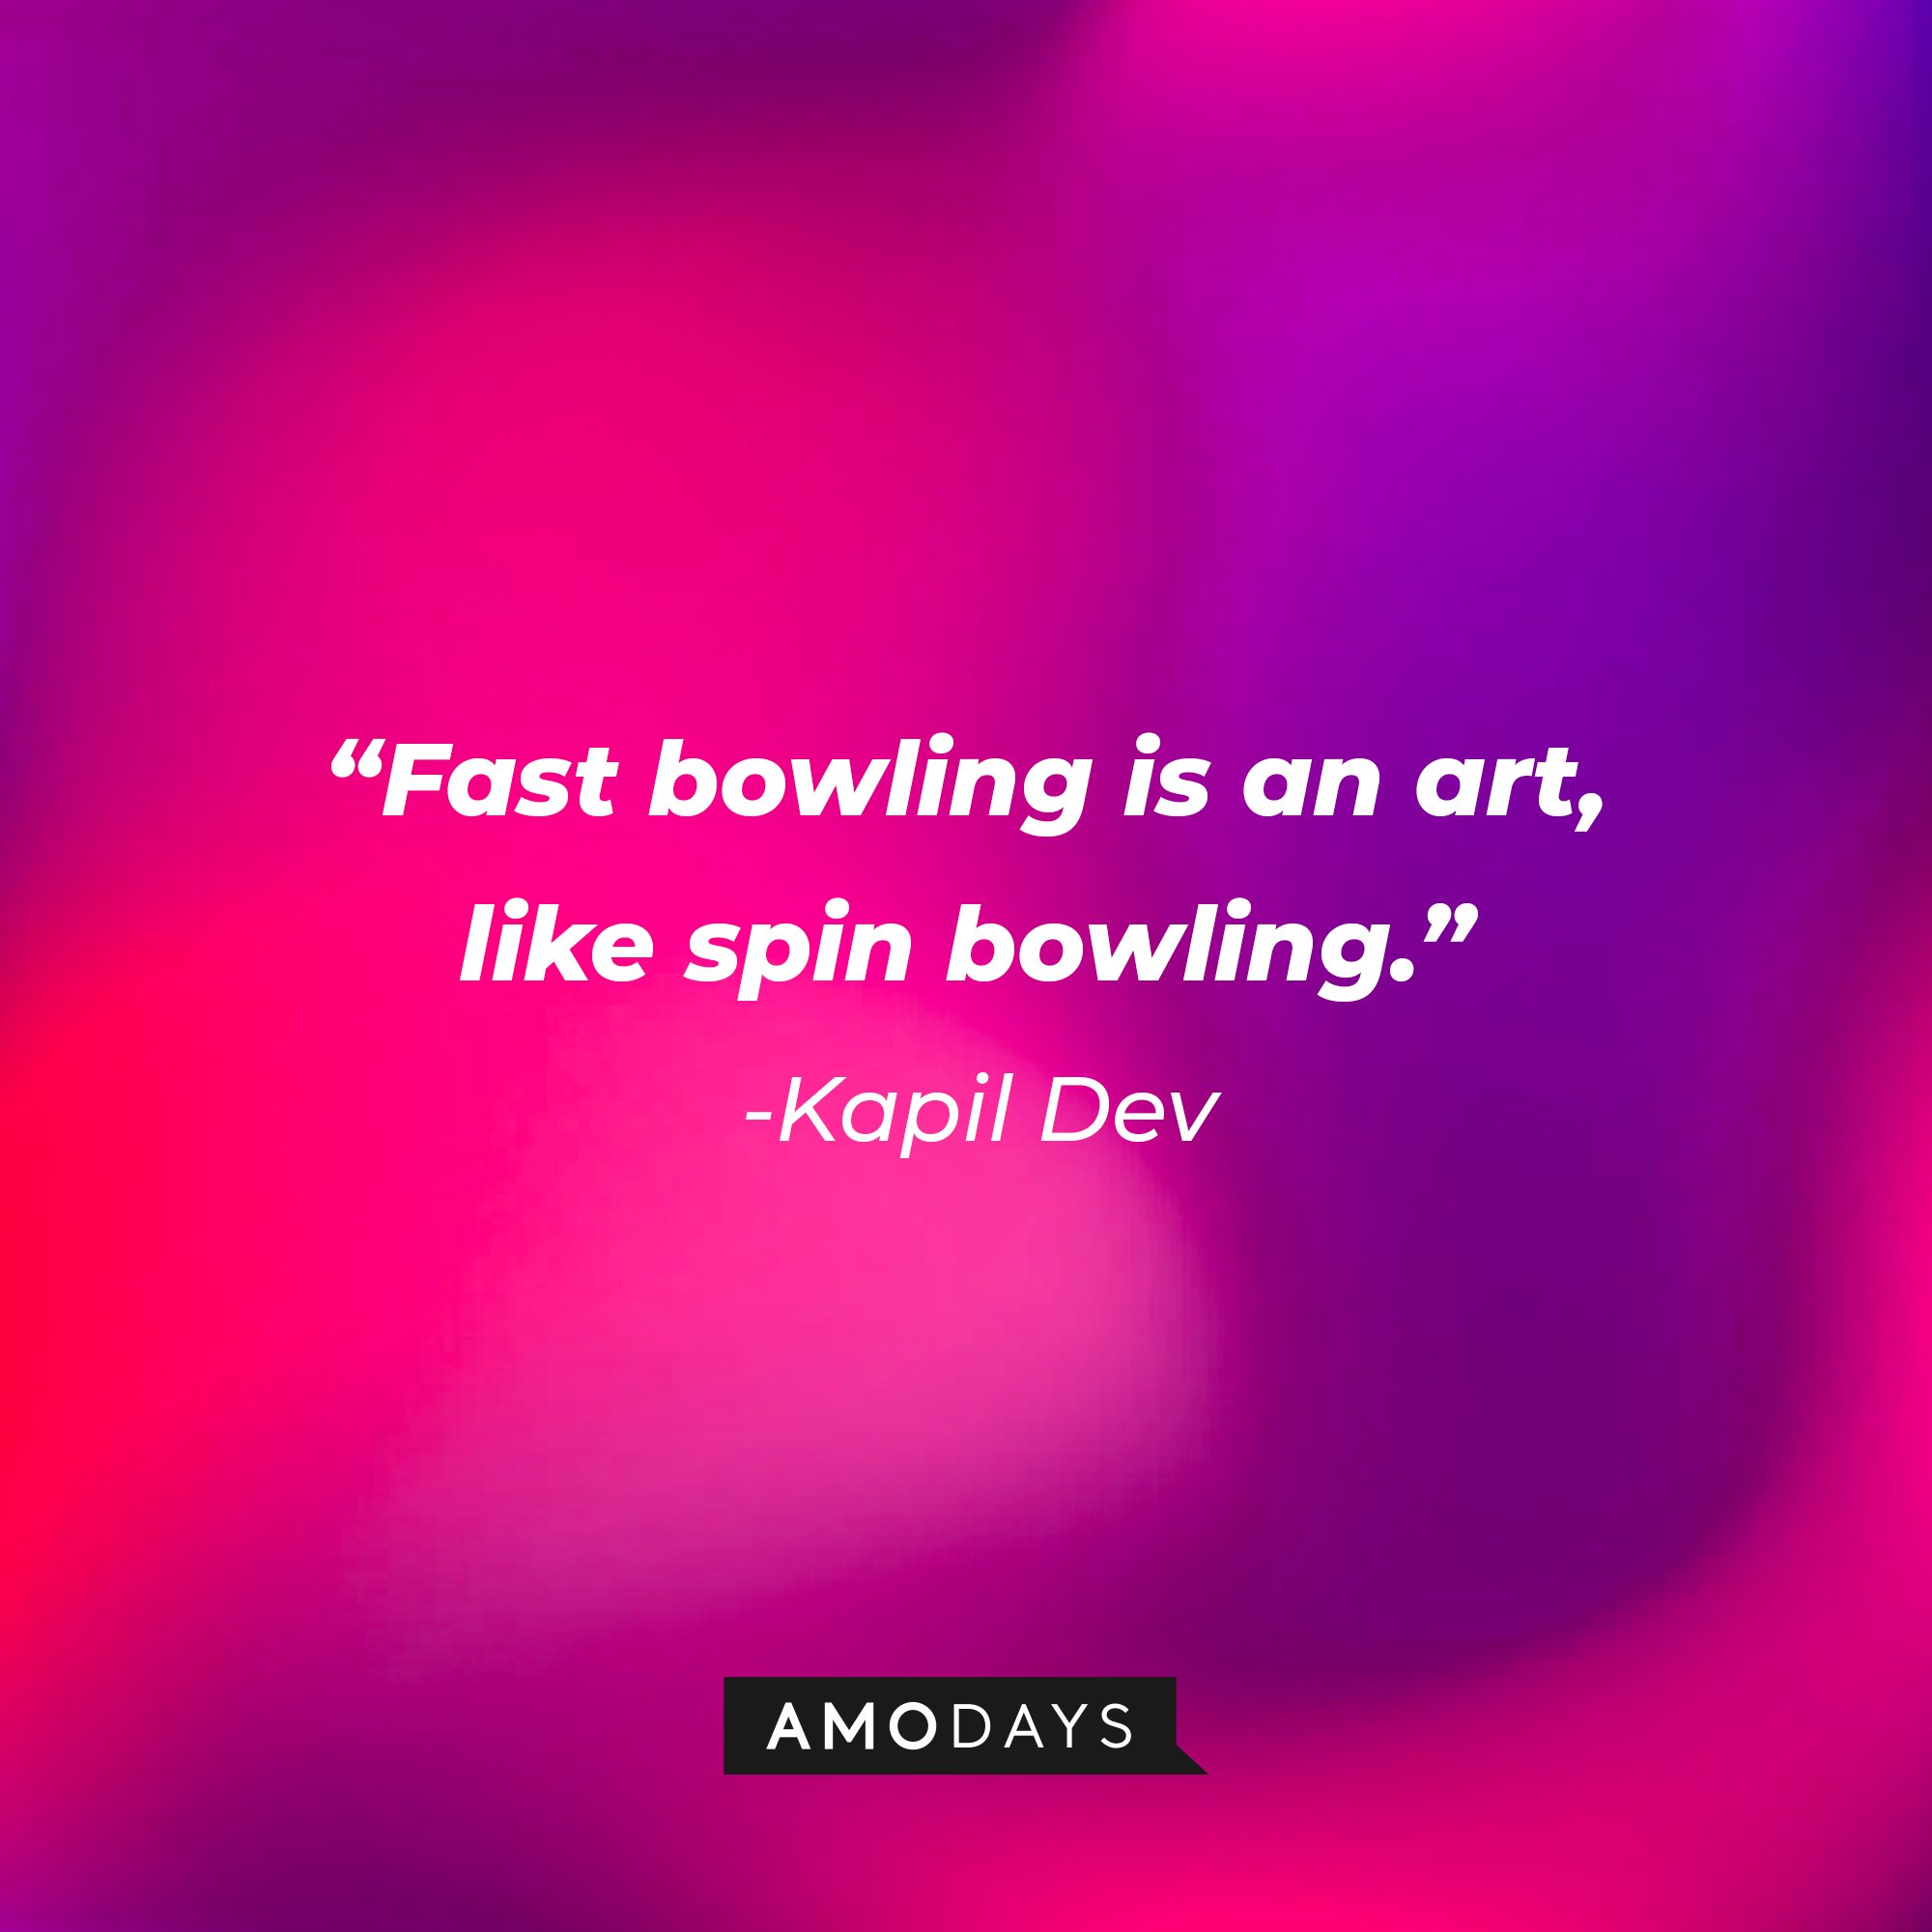 Kapil Dev's quote: "Fast bowling is an art, like spin bowling." | Image: AmoDays